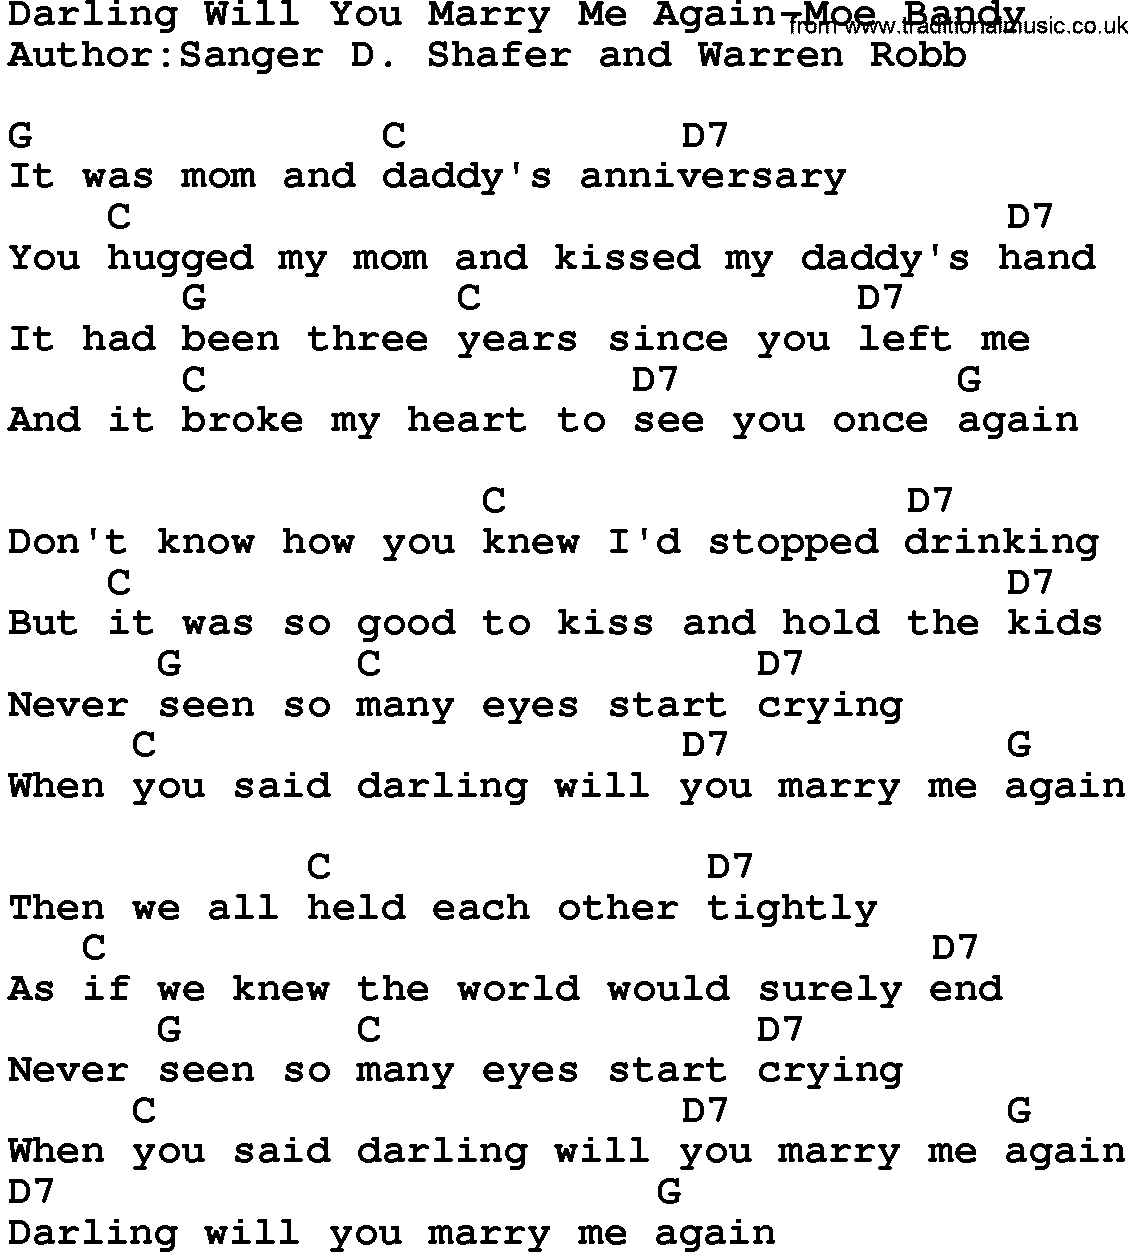 Country music song: Darling Will You Marry Me Again-Moe Bandy lyrics and chords